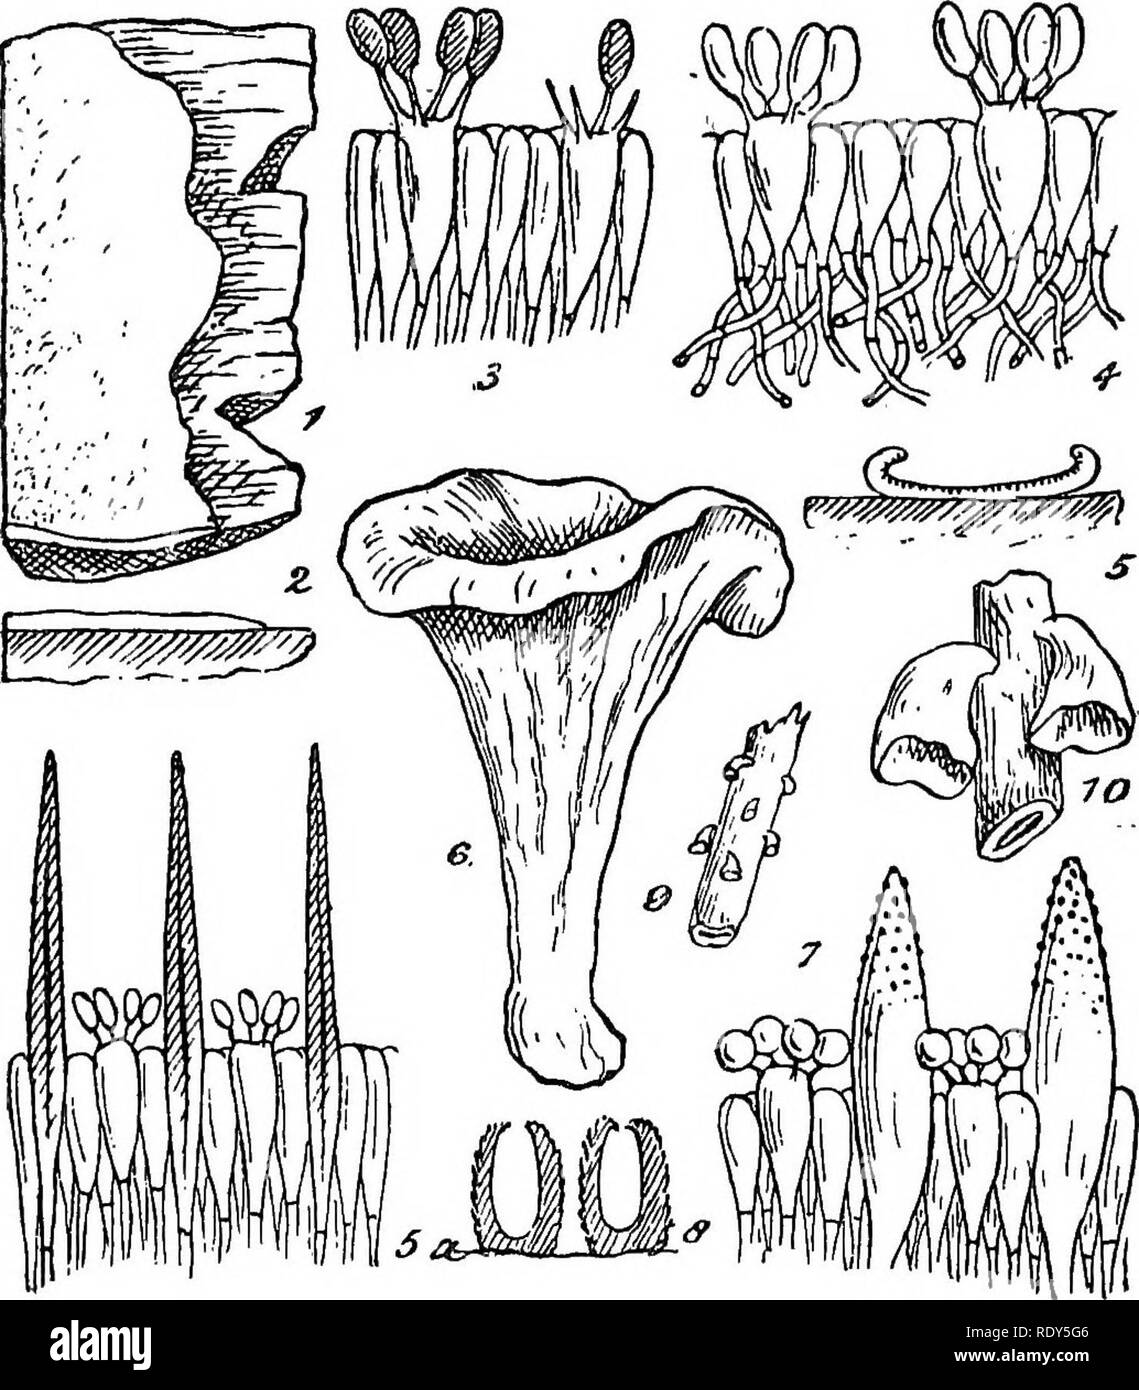 . British fungus-flora. A classified text-book of mycology. Fungi. 94 FUNGUS-FLOEA.. FIGUEE8 ILLUSTRATING THE GENBKA OF THE THELEPEOREAE. Fig. 1, Coniophora olivaoea, portion of fungus, nat. size, growing on wood;—^Fig. 2, section of same seated on wood, nat. size;—Pig. 3, section of portion of hymenium of same, showing basidia with four sterigmata, each bearing a coloured spore; between the basidia are clavate paraphysea; highly mag.;—Pig. 4, section through portion of hymenium of Corticiwm. Please note that these images are extracted from scanned page images that may have been digitally enha Stock Photo